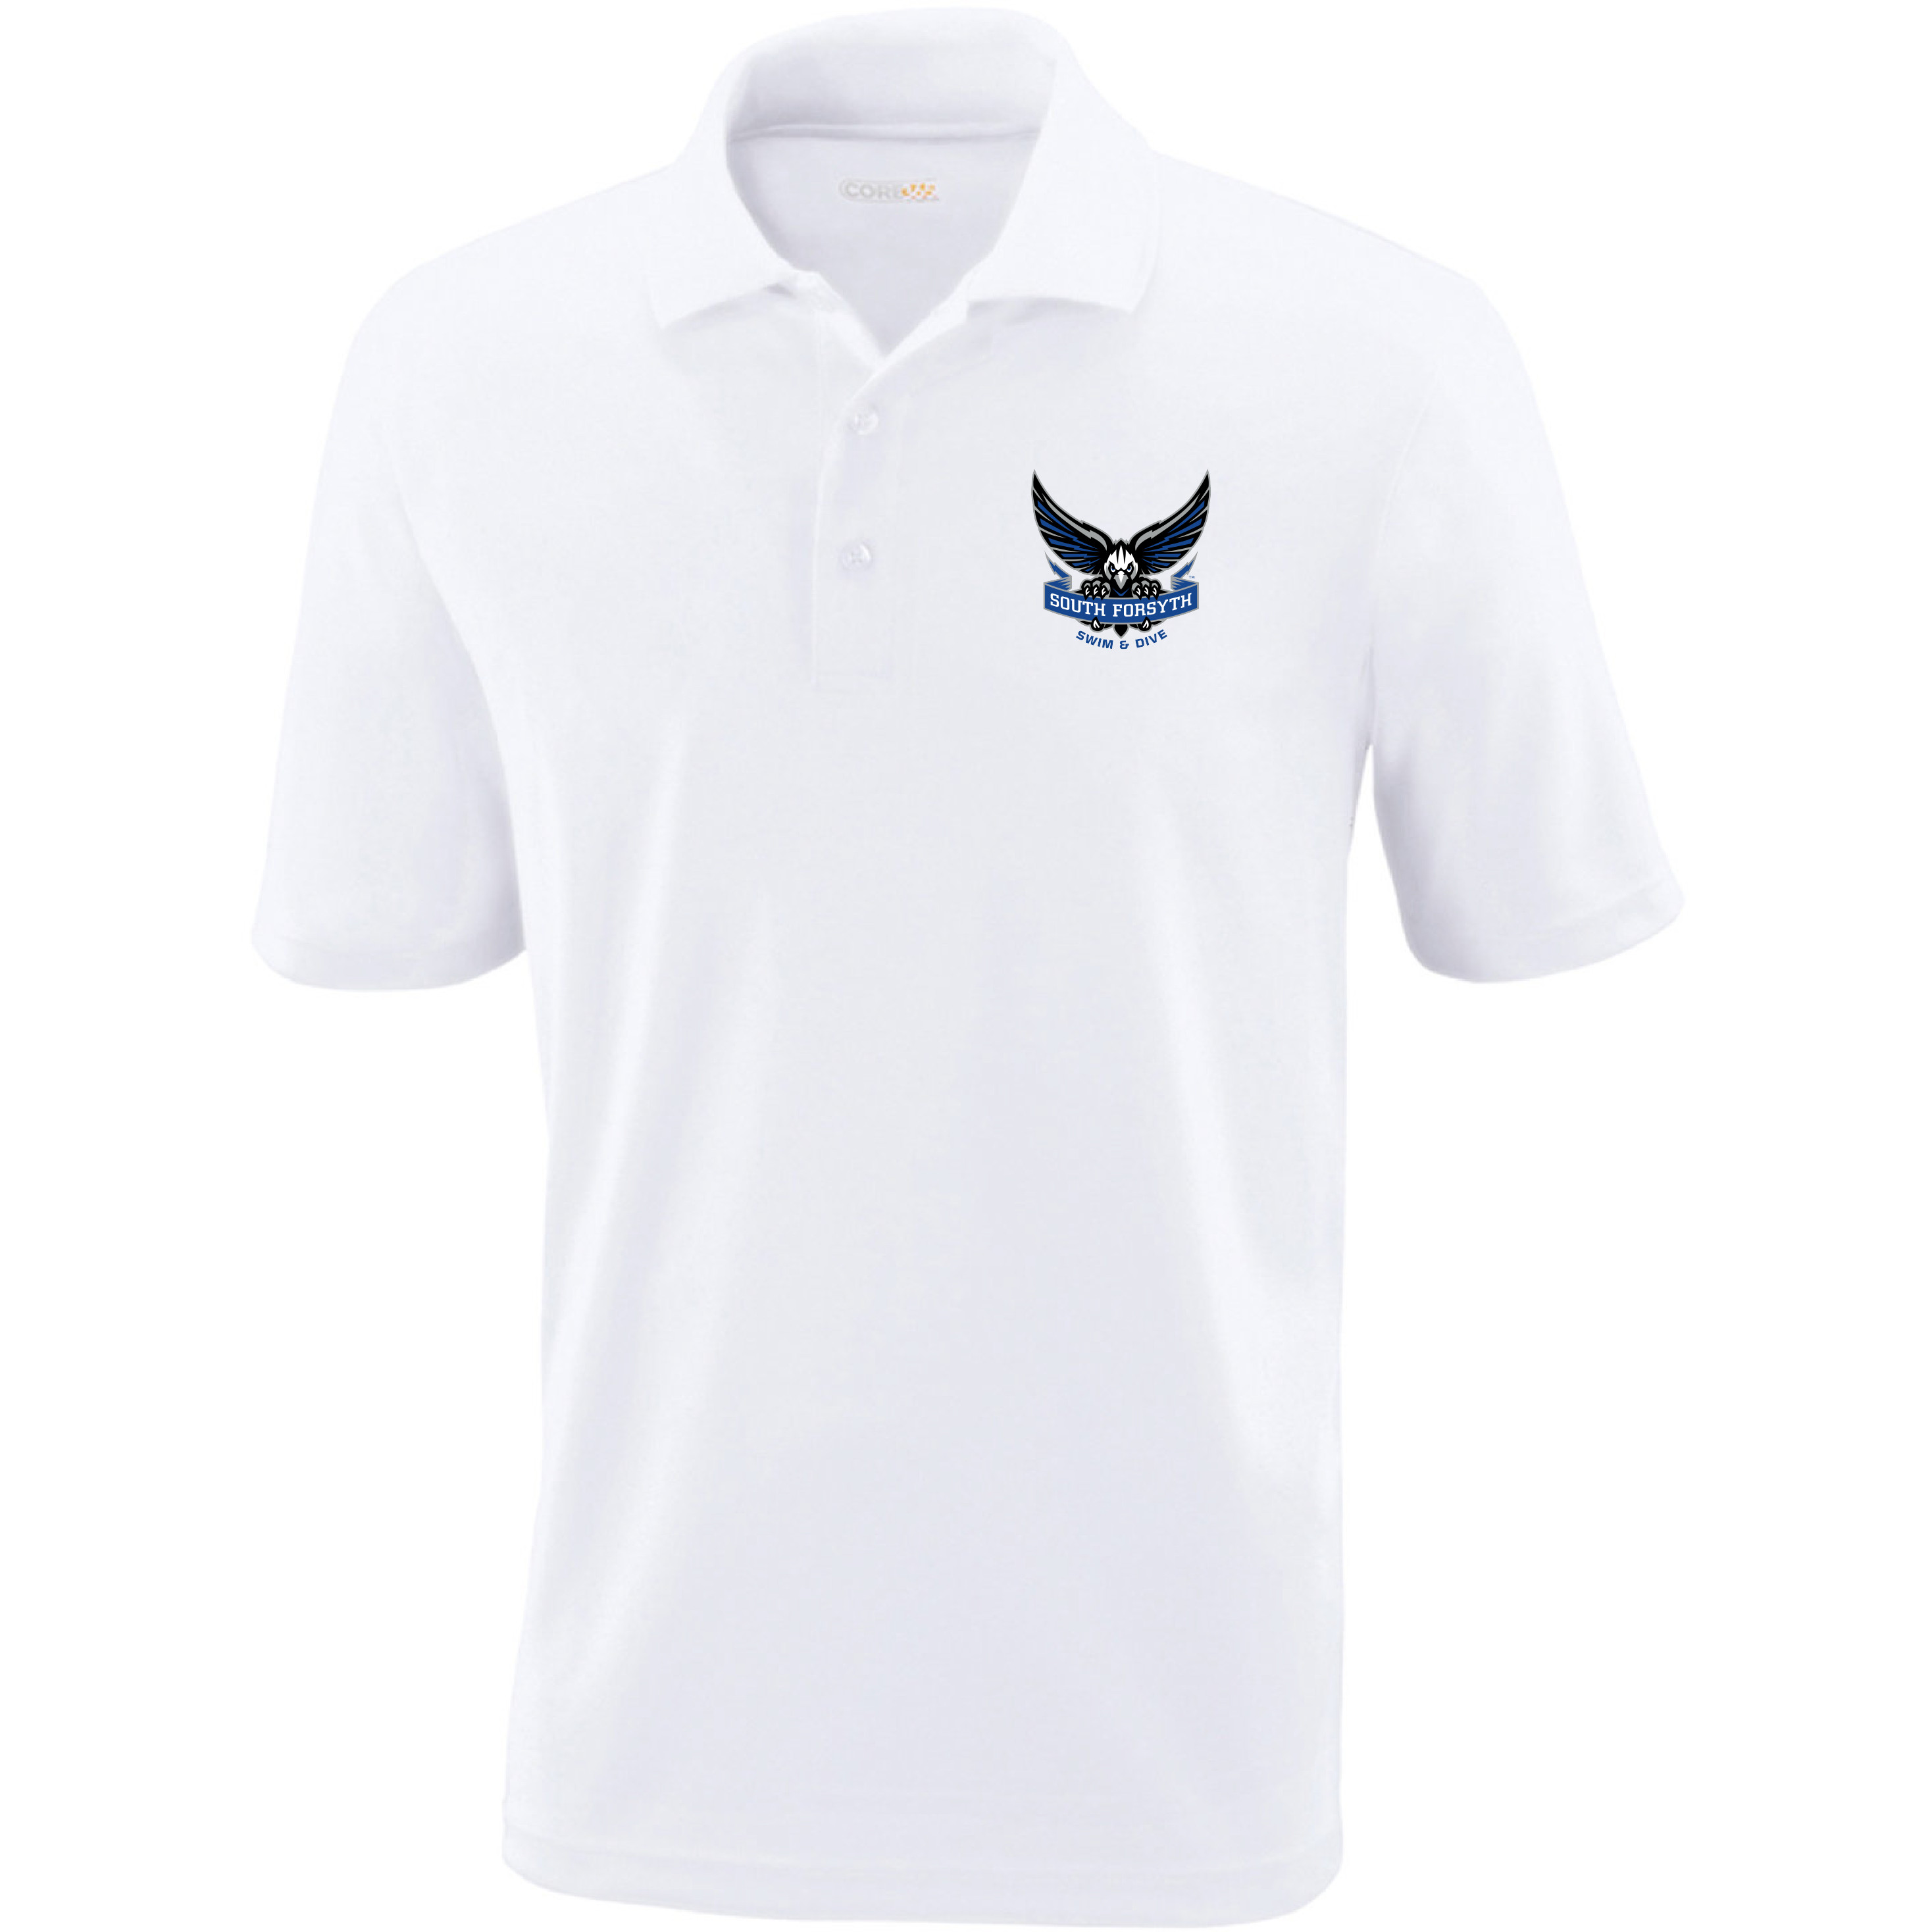 Dri-Fit Men's Polo (Customized) - South Forsyth